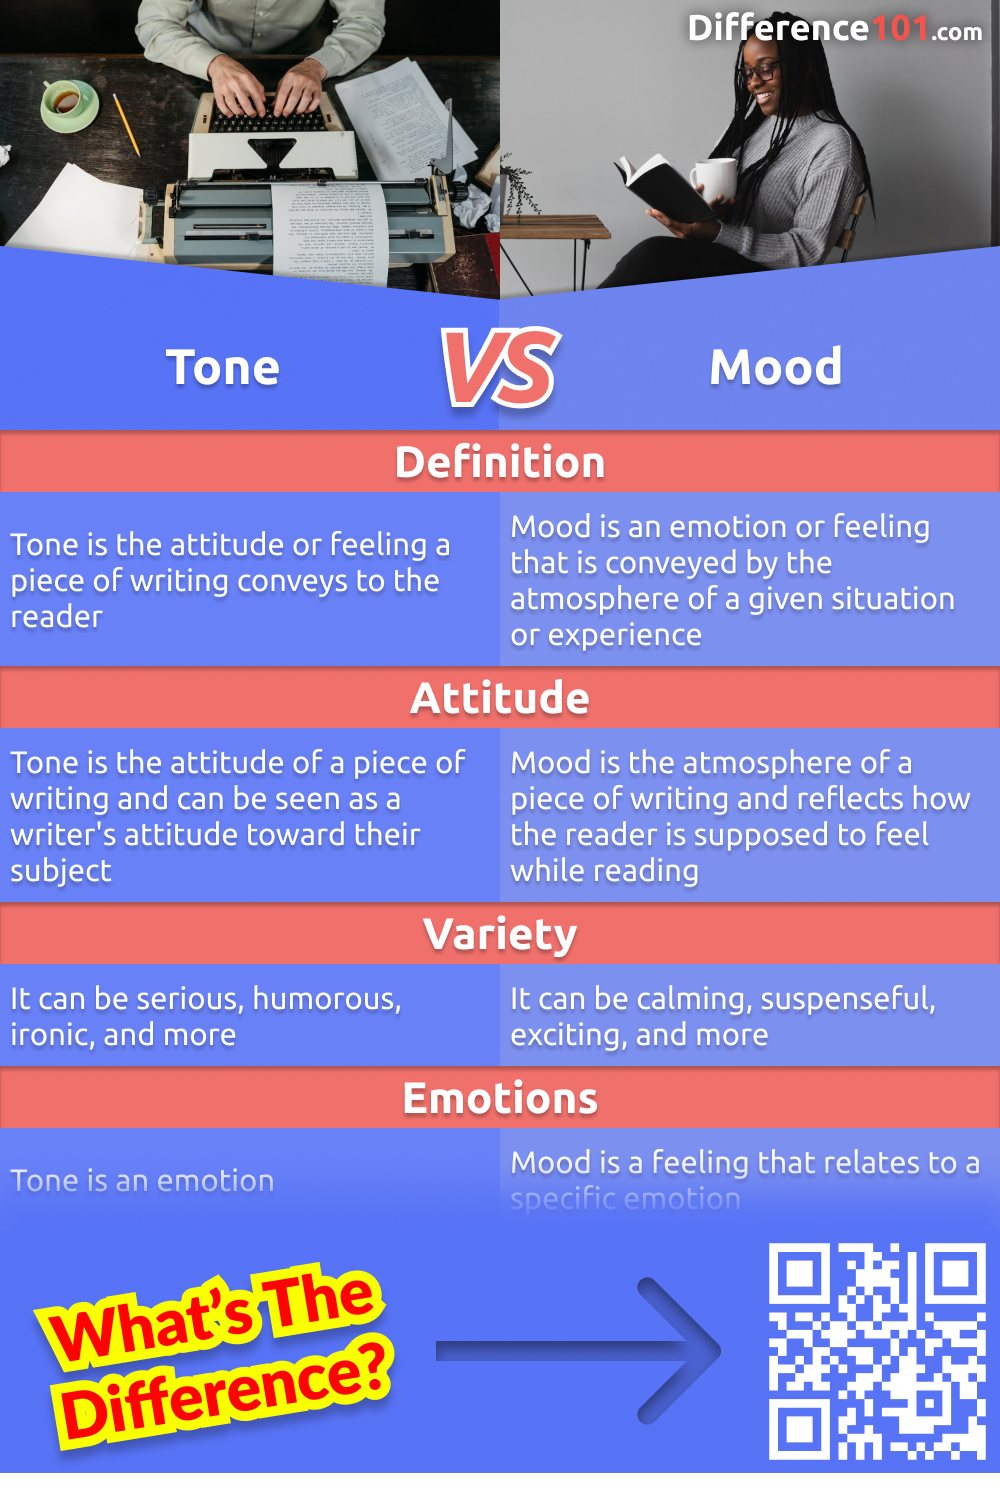 Tone and mood are two literary elements that are often confused. We will discuss the differences between the two, as well as the pros, cons of each and when you should use each one. Read more to learn.